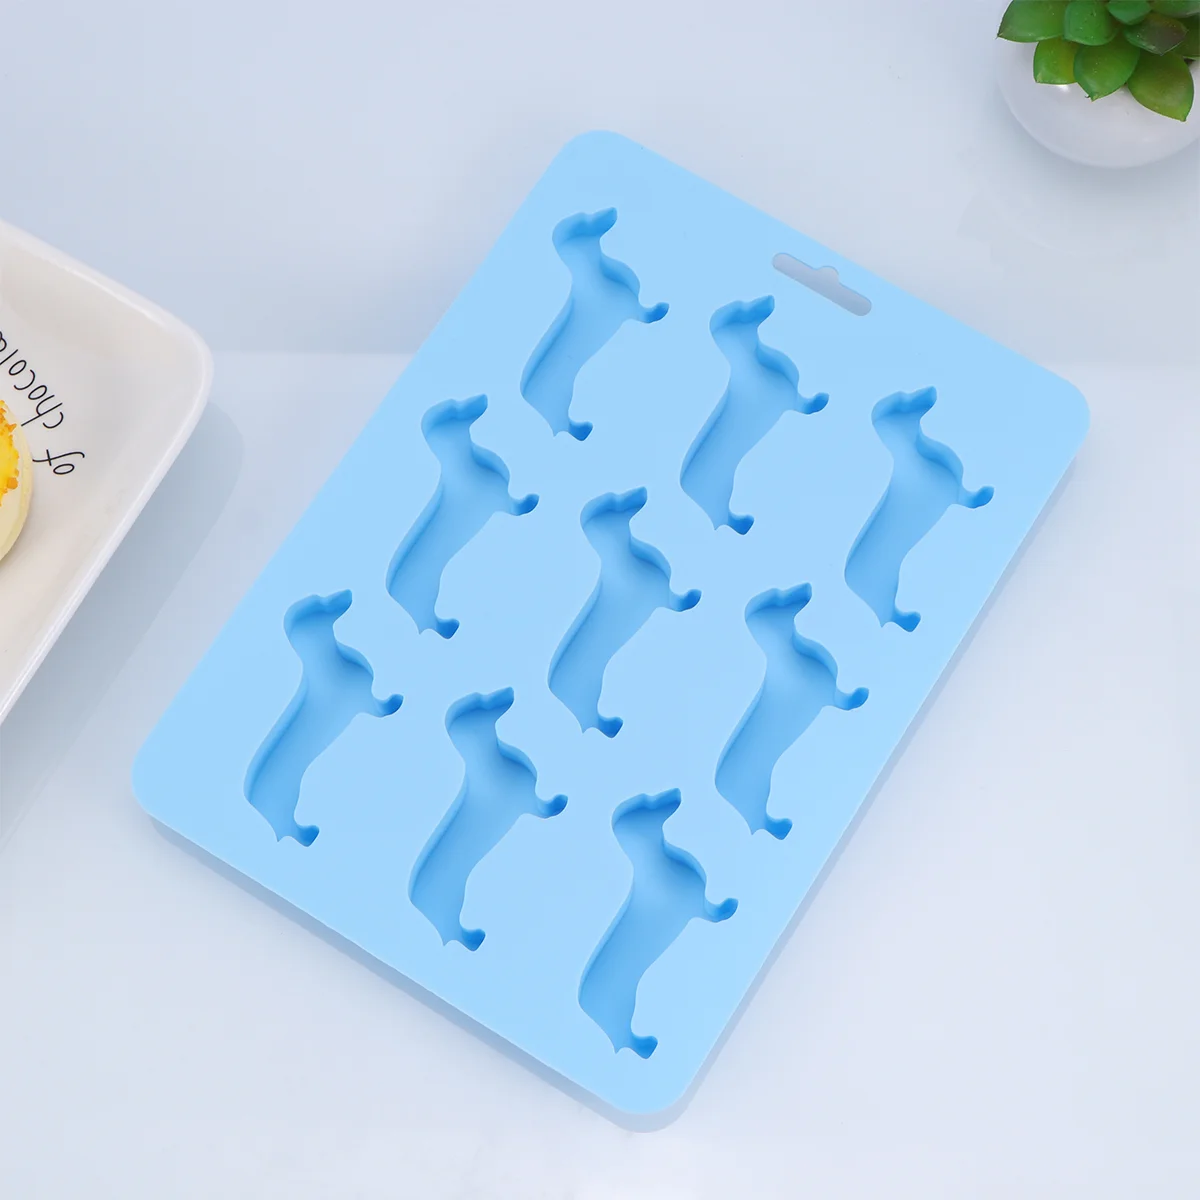 

Ice Cube Silicone Mold Tray Molds Diy Dog Trays Maker Baking Cartoon Candy Jelly Moulds Chocolate Dachshund Mould Gifts Pug